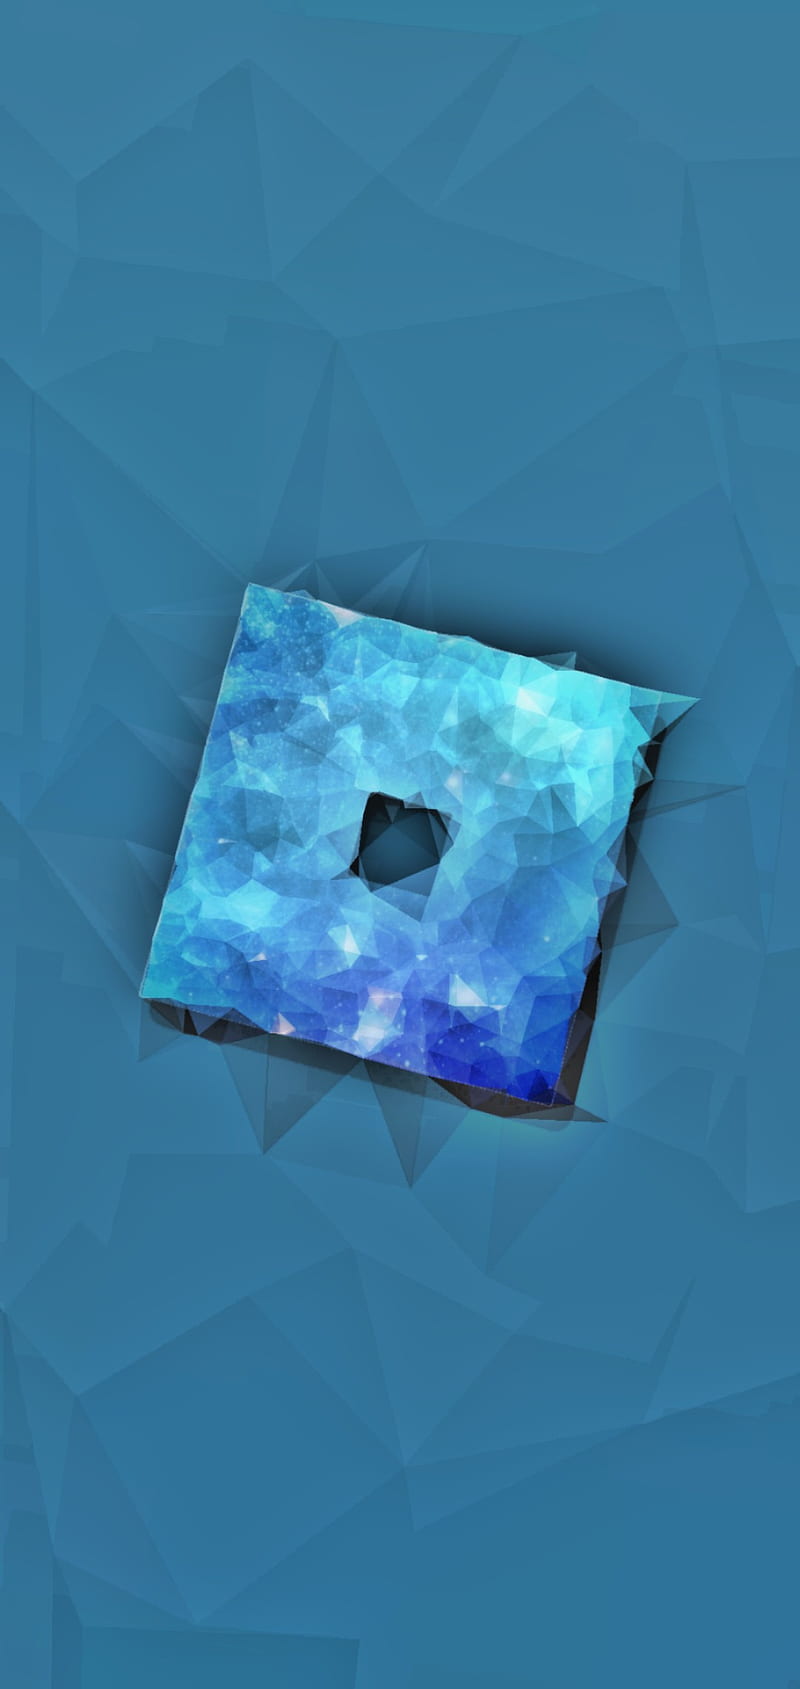 Wallpapers for Roblox by Jordan Pickford